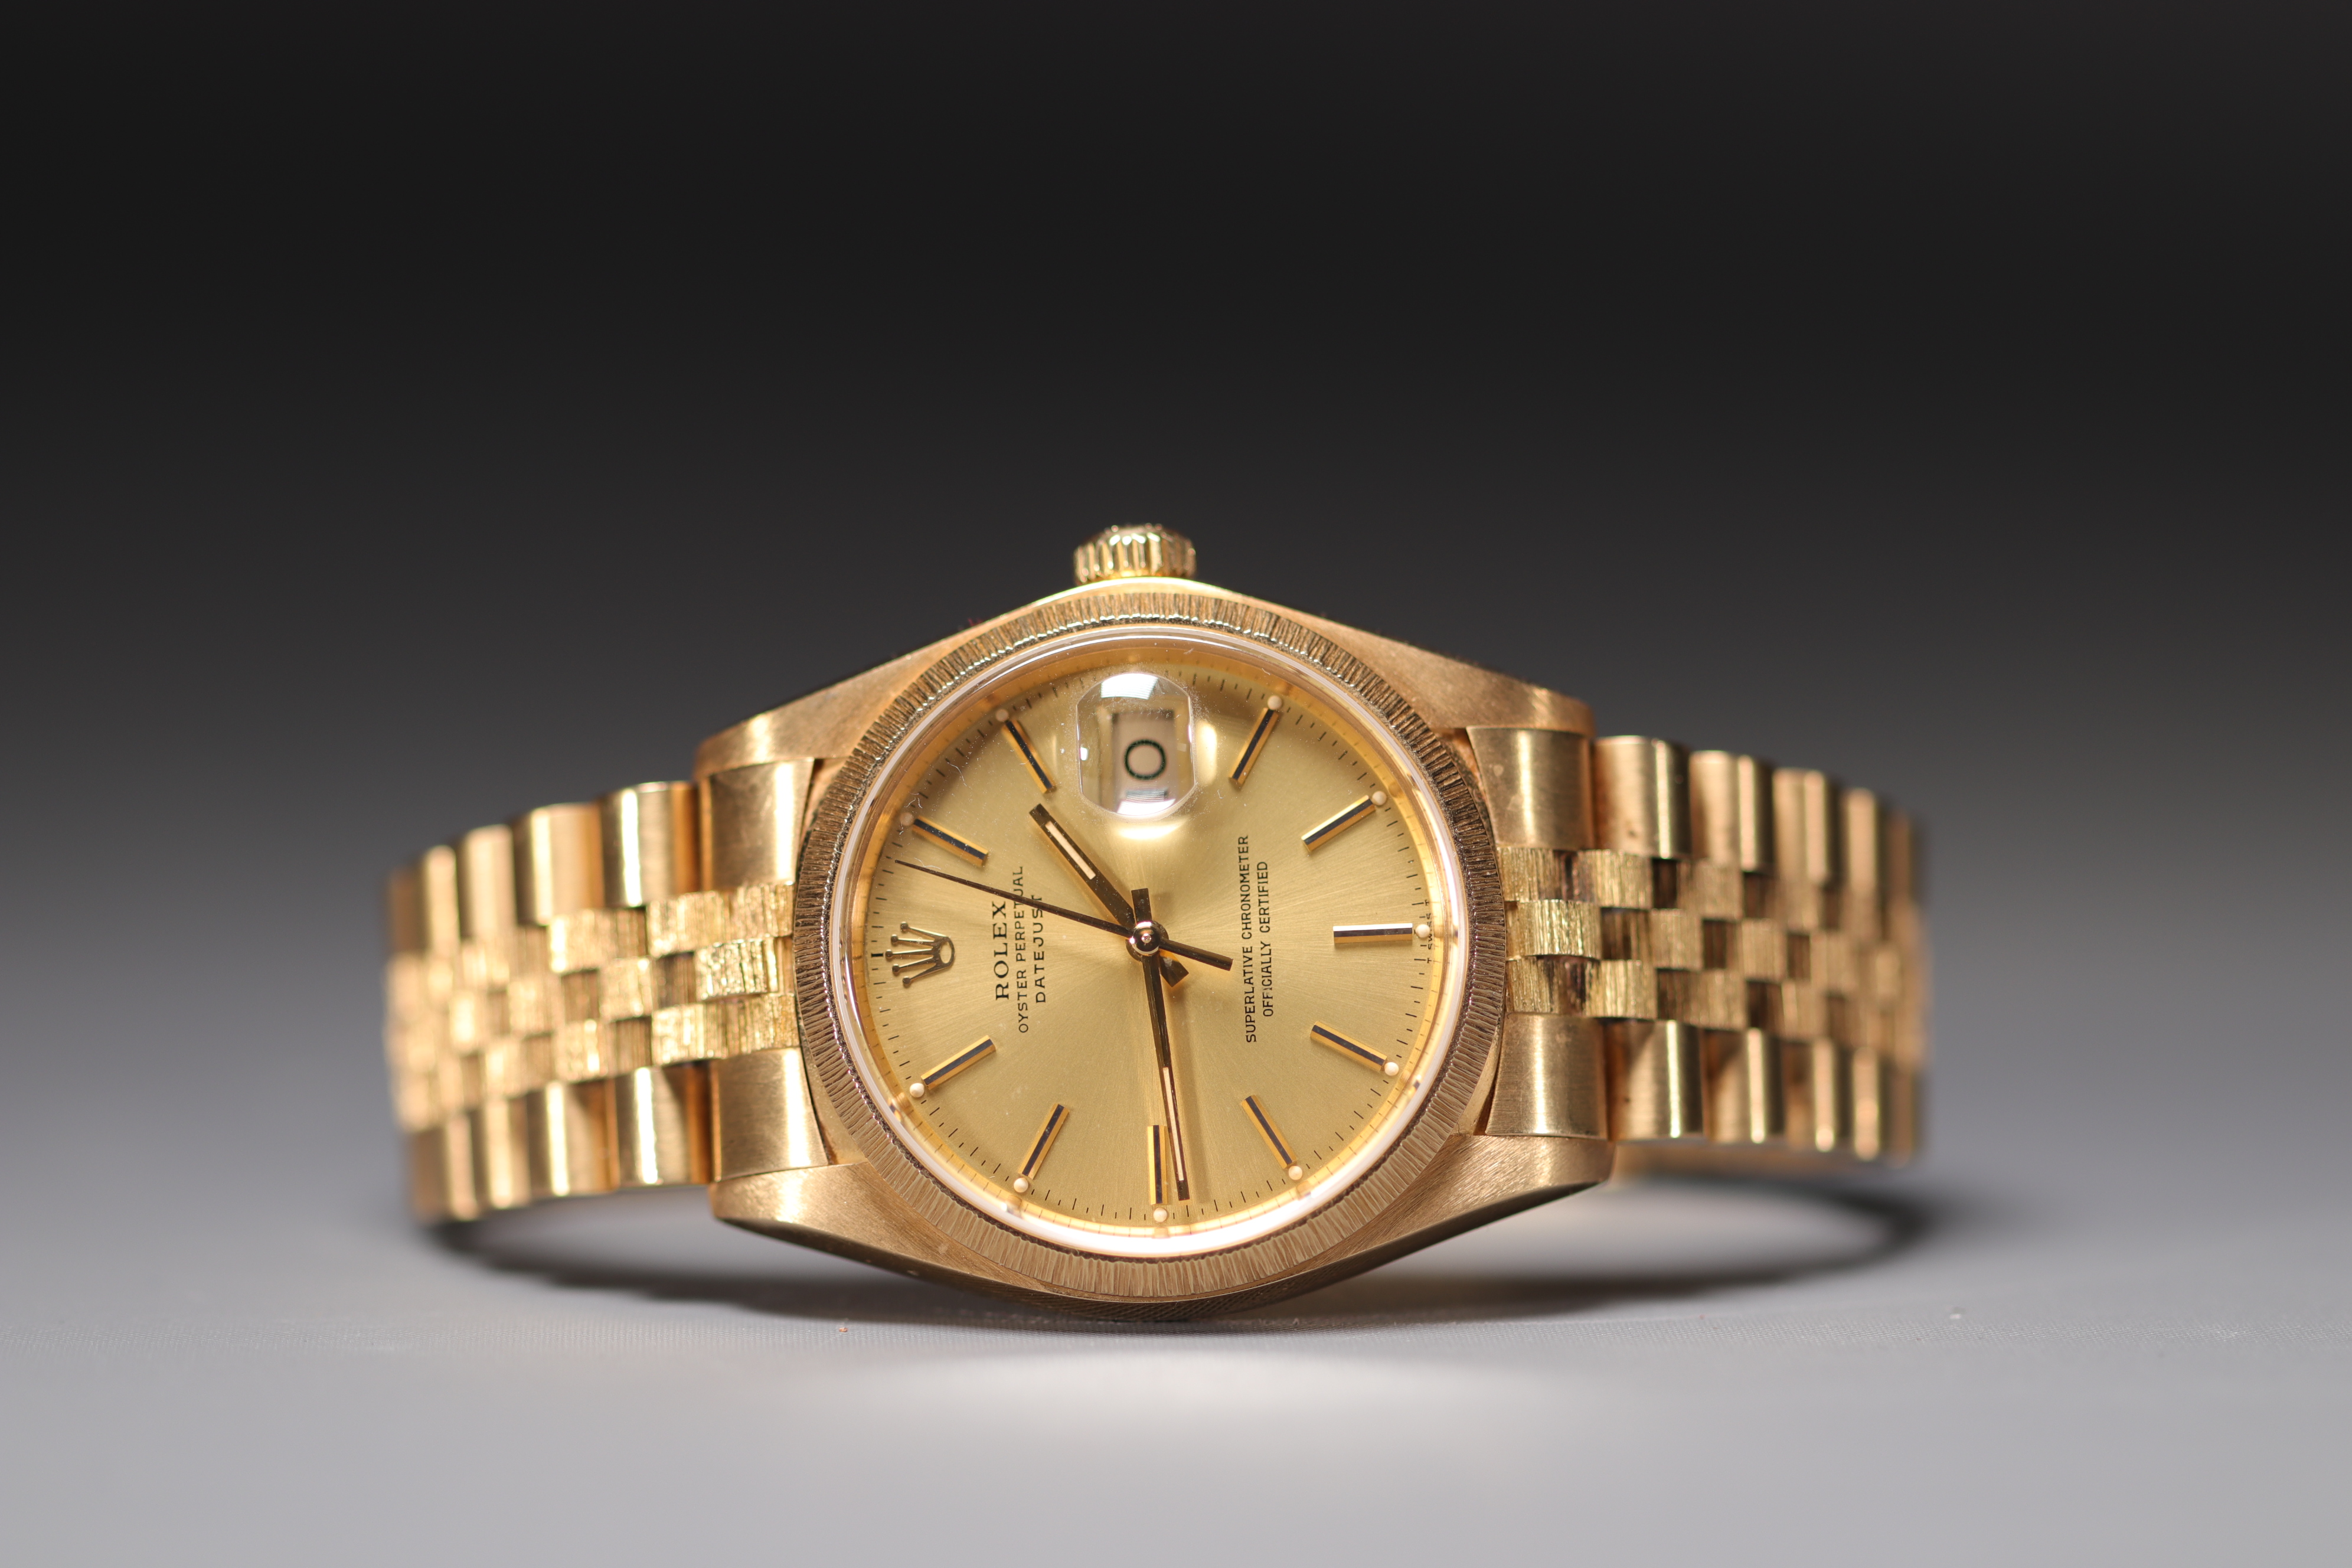 Rolex Oyster Perpetual Datejust (16078) in 18k yellow gold, "Jubilee" bracelet, Full Set, year 1980. - Image 2 of 4